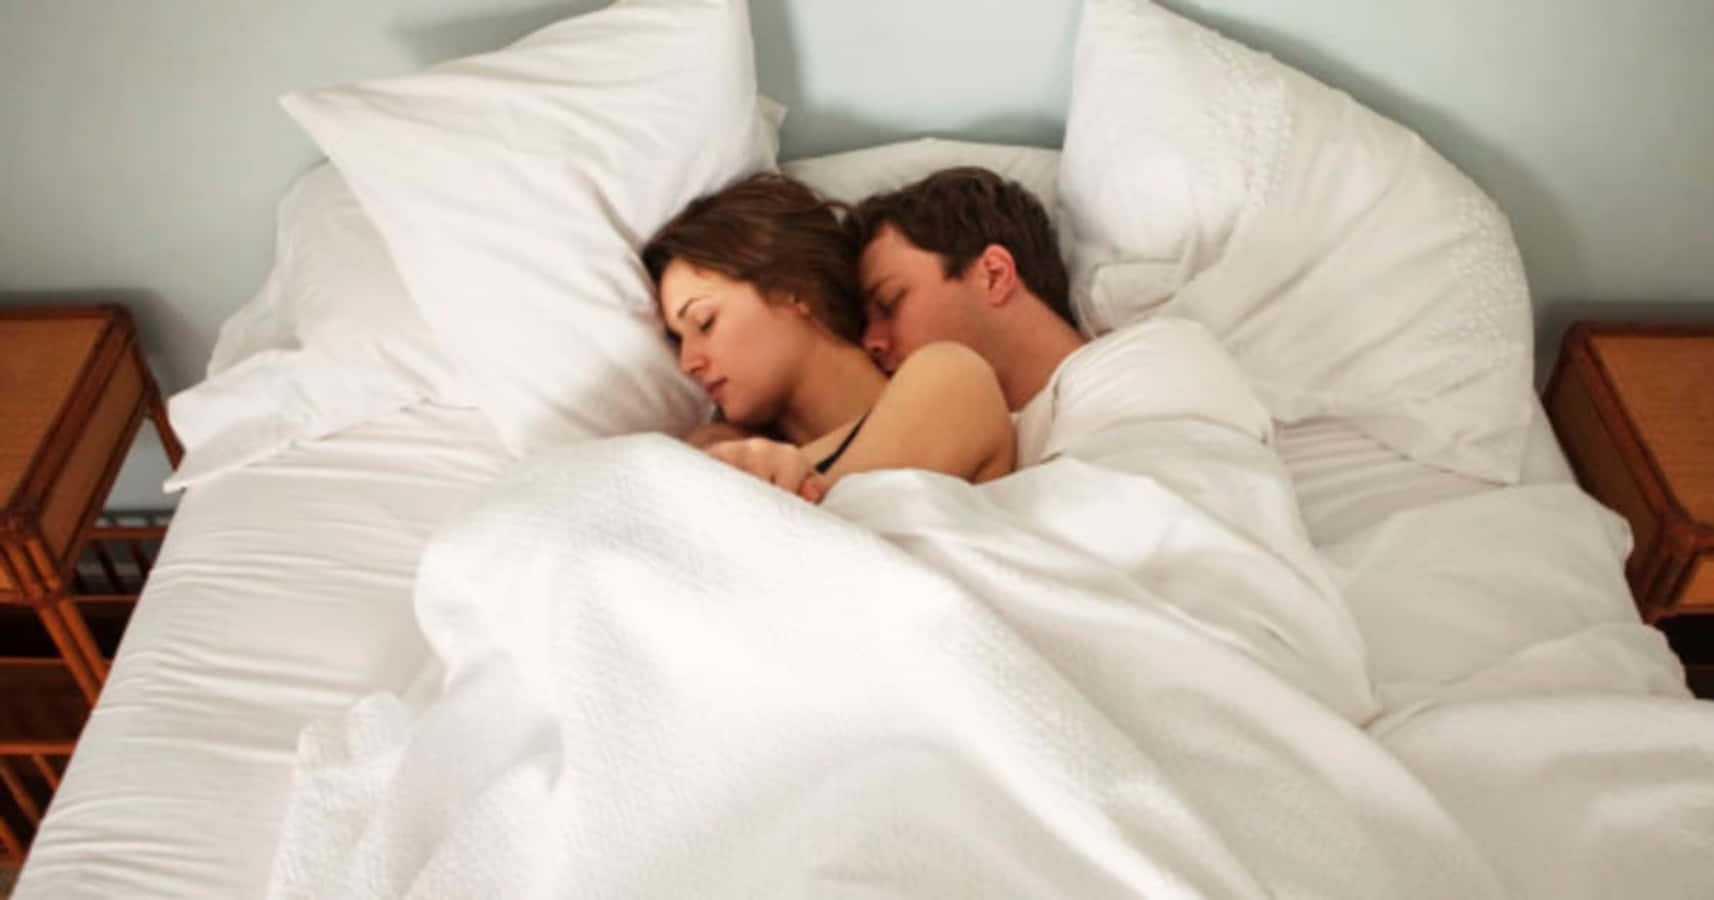 White Bedspread Cuddling Pictures